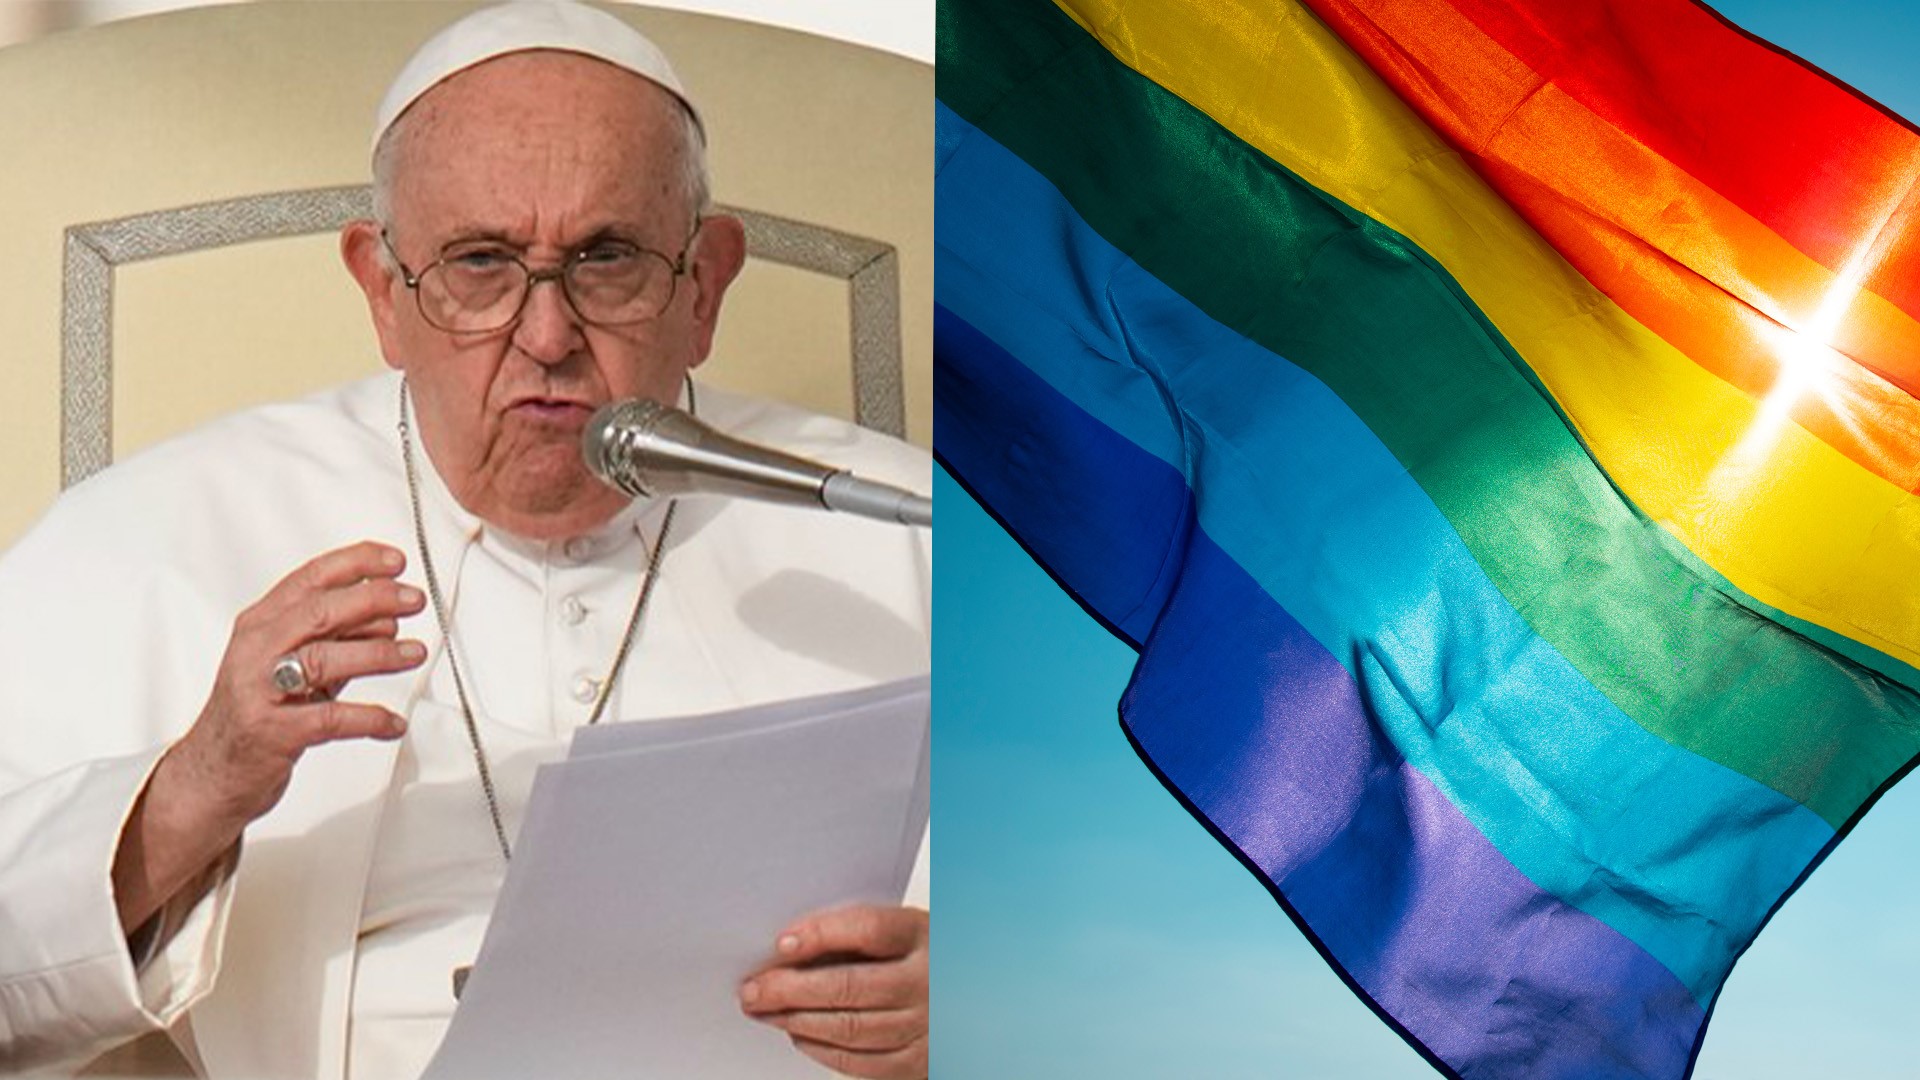 The major change in Vatican policy marks the latest gesture of outreach from a pope who has made welcoming LGBTQ+ Catholics a hallmark of his papacy.